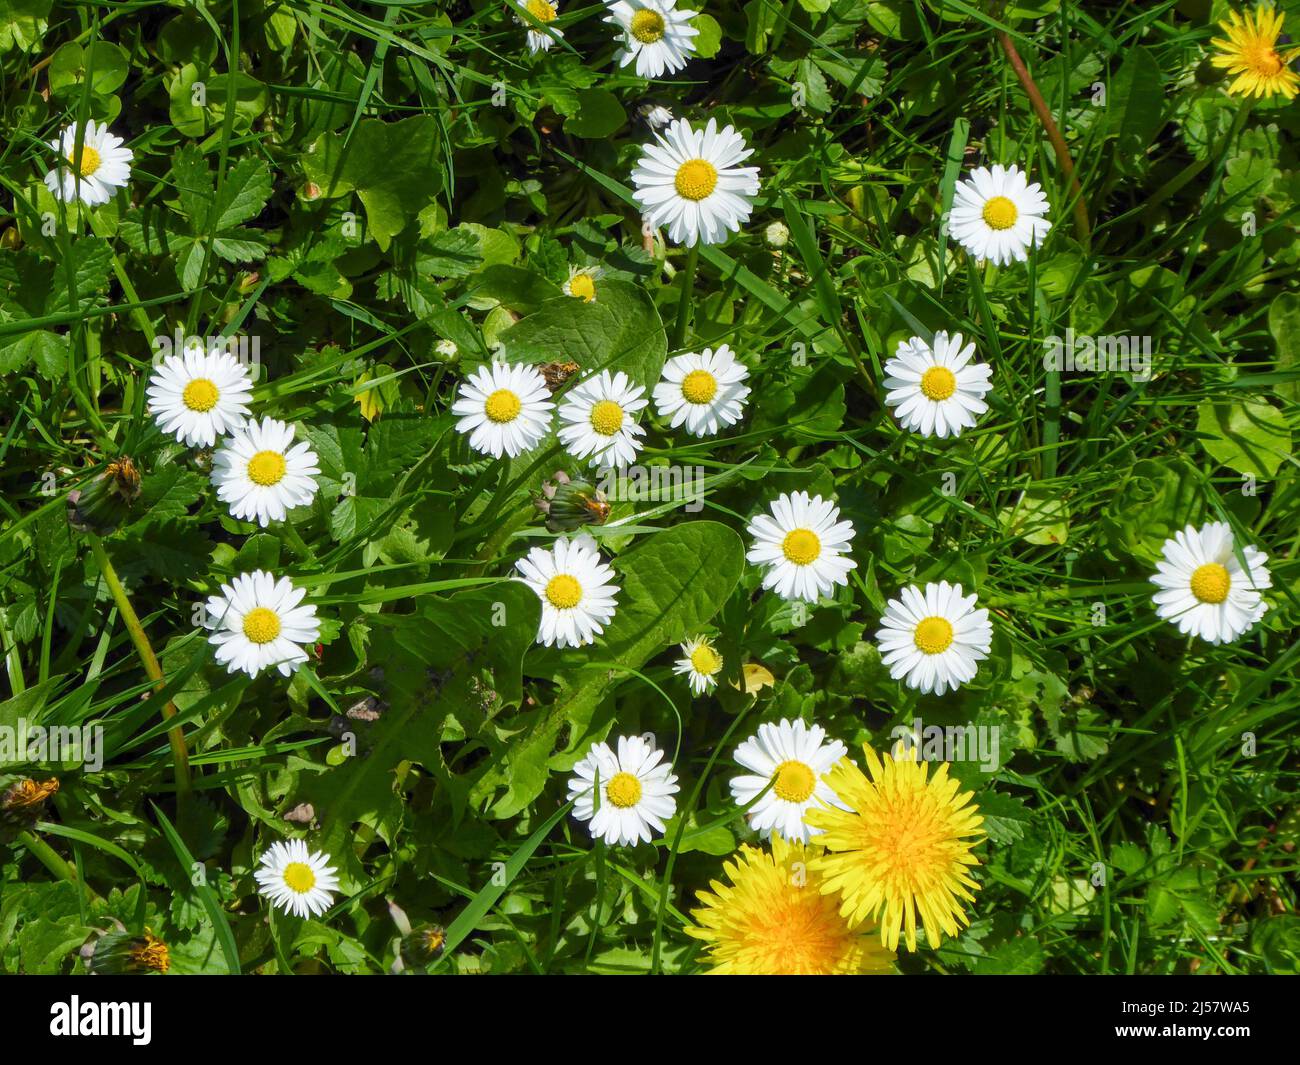 View from above of a spring meadow with blooming daisies (Bellis perennis) and dandelions (Taraxacum officinale) Stock Photo